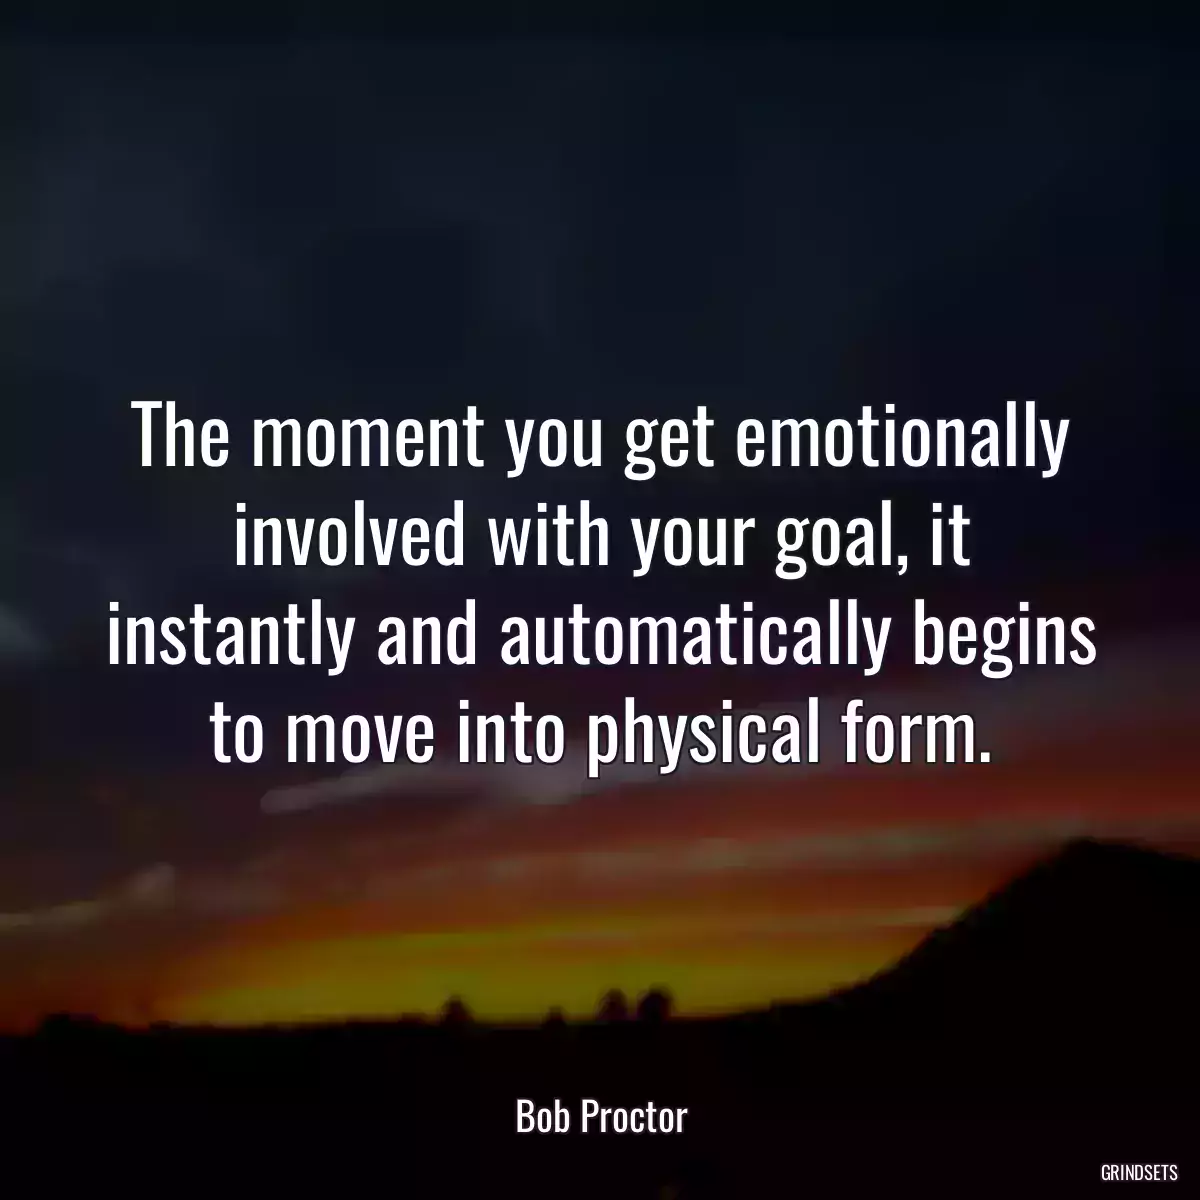 The moment you get emotionally involved with your goal, it instantly and automatically begins to move into physical form.